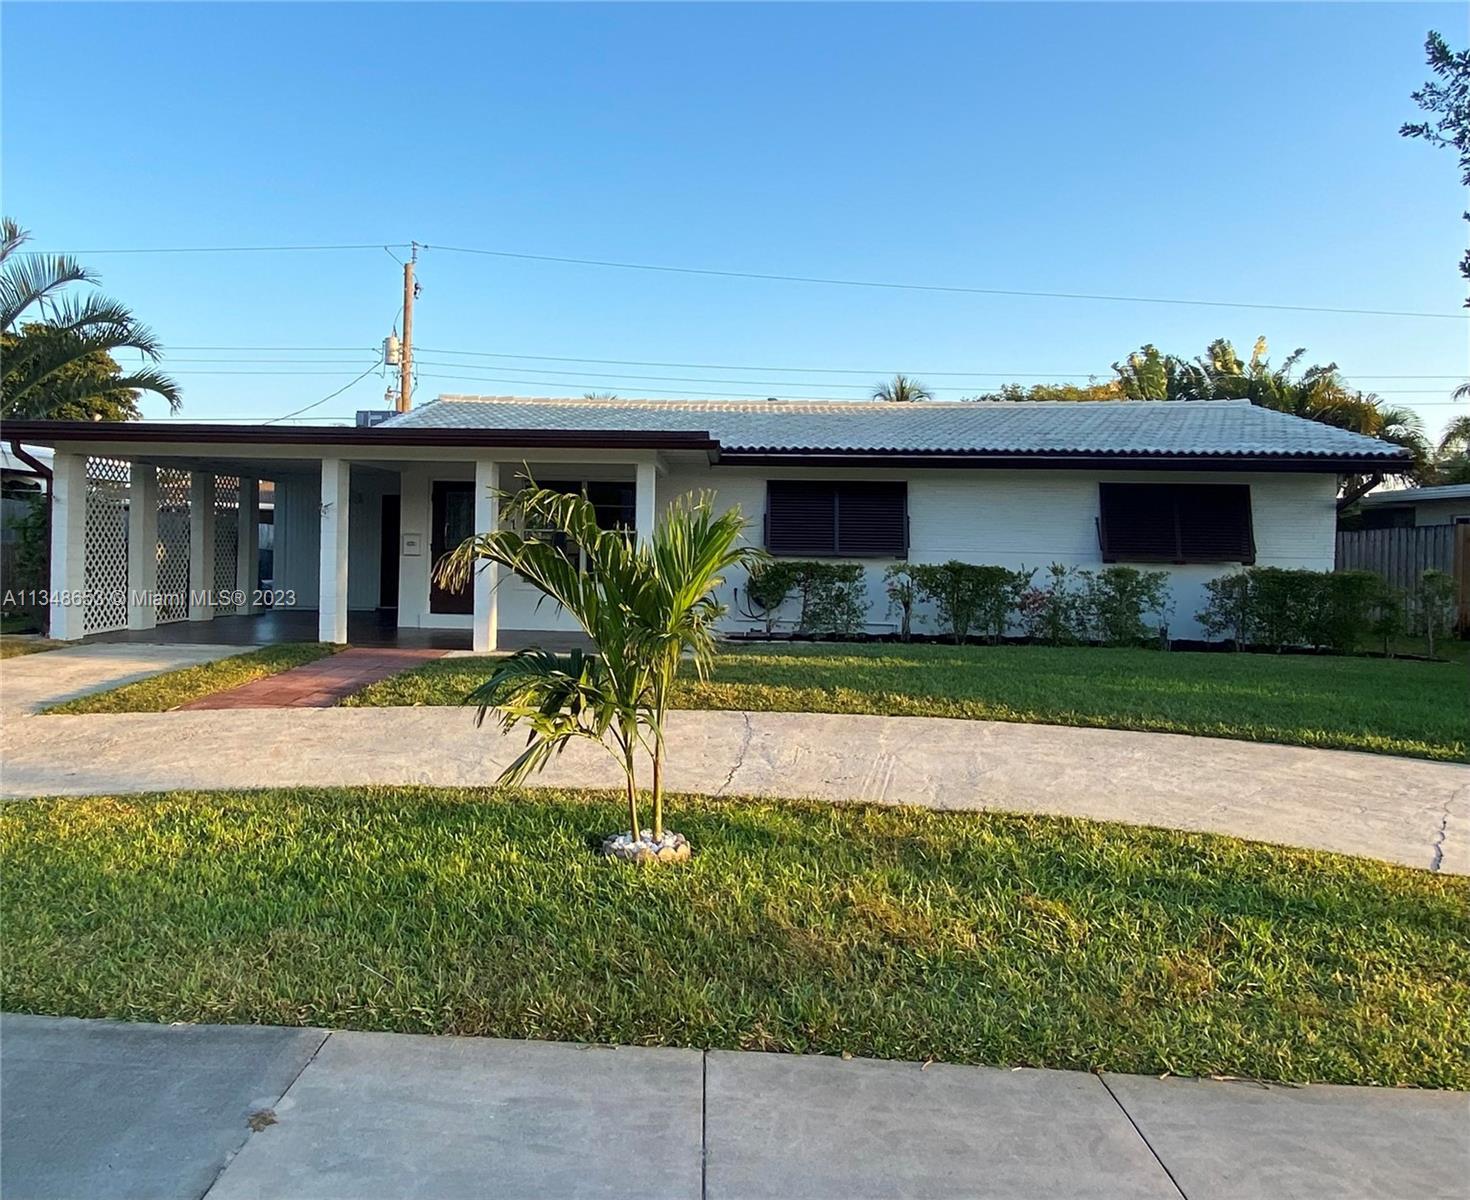 EXCELLENT LOCATION! Immaculate & beautifully completely remodeled 3 bedrooms, 2 bathrooms, bonus roo